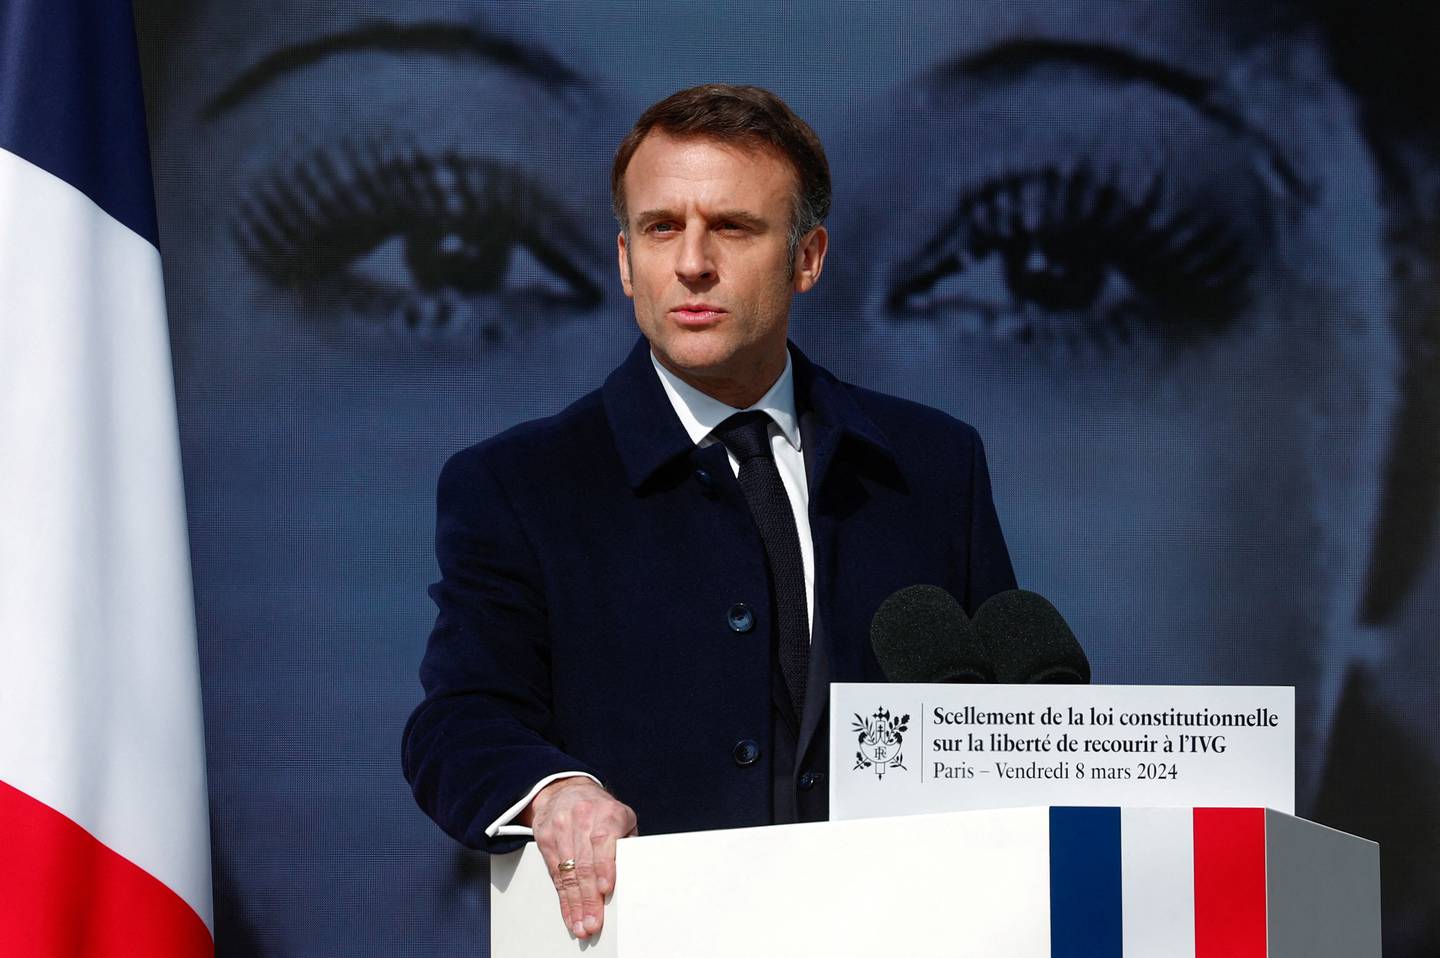 French President Emmanuel Macron delivers a speech during a ceremony to seal the right to abortion in the French constitution, on International Women's Day, at the Place Vendome, in Paris, on March 8, 2024. (Photo by Gonzalo Fuentes / POOL / AFP)